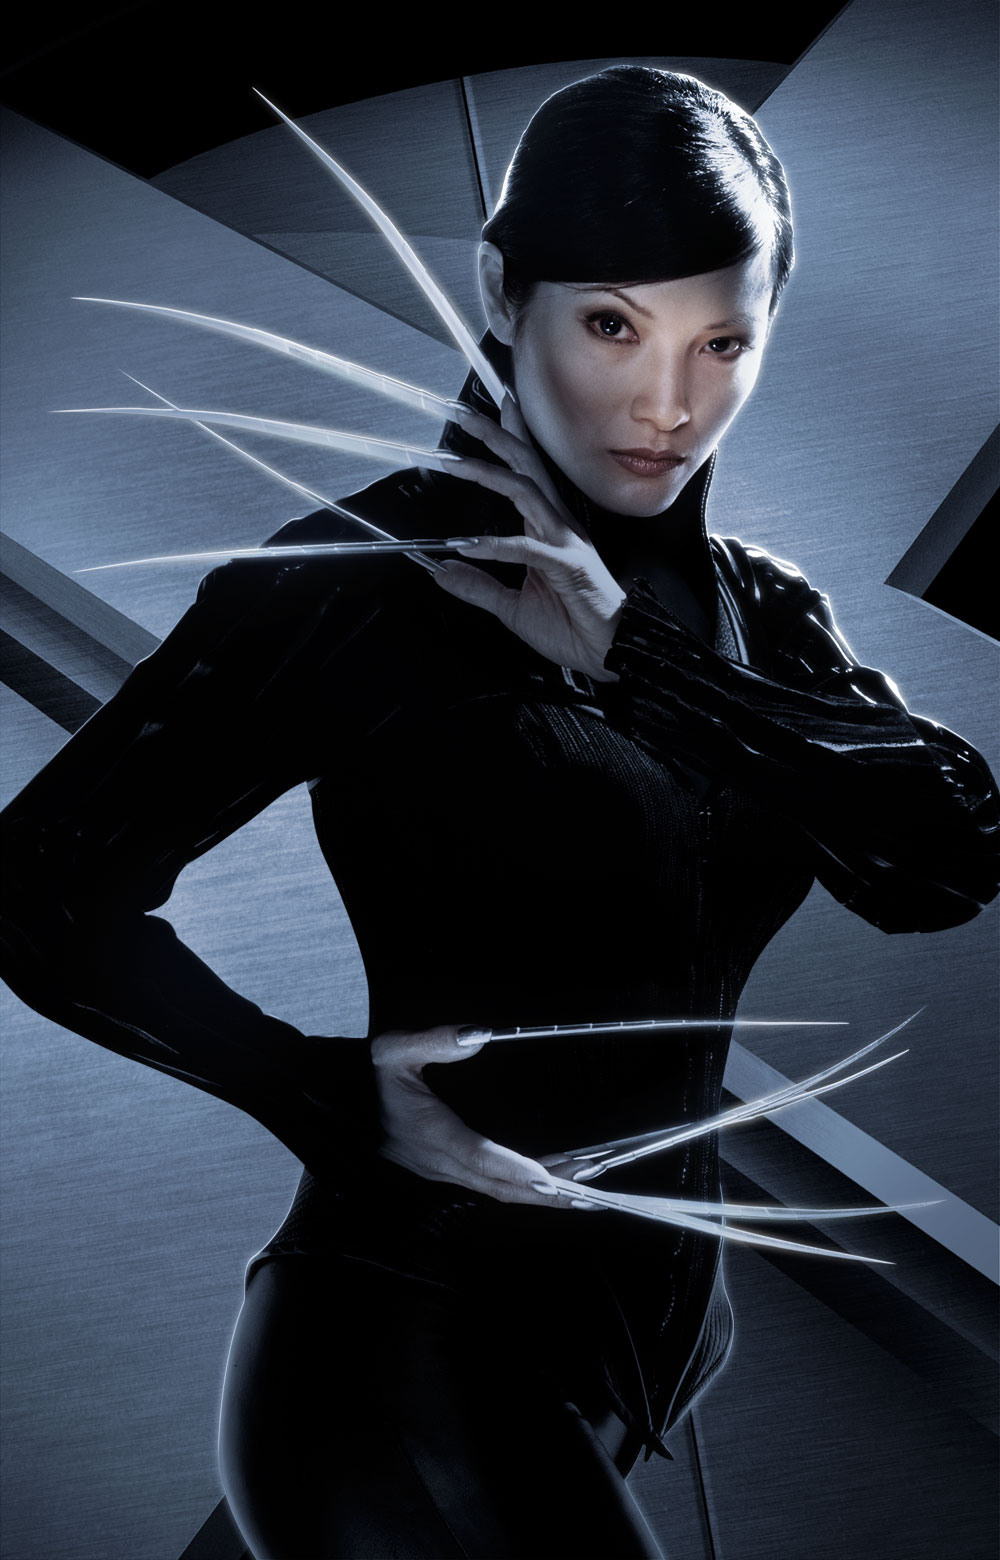 Lady Deathstrike Backgrounds, Compatible - PC, Mobile, Gadgets| 1000x1560 px